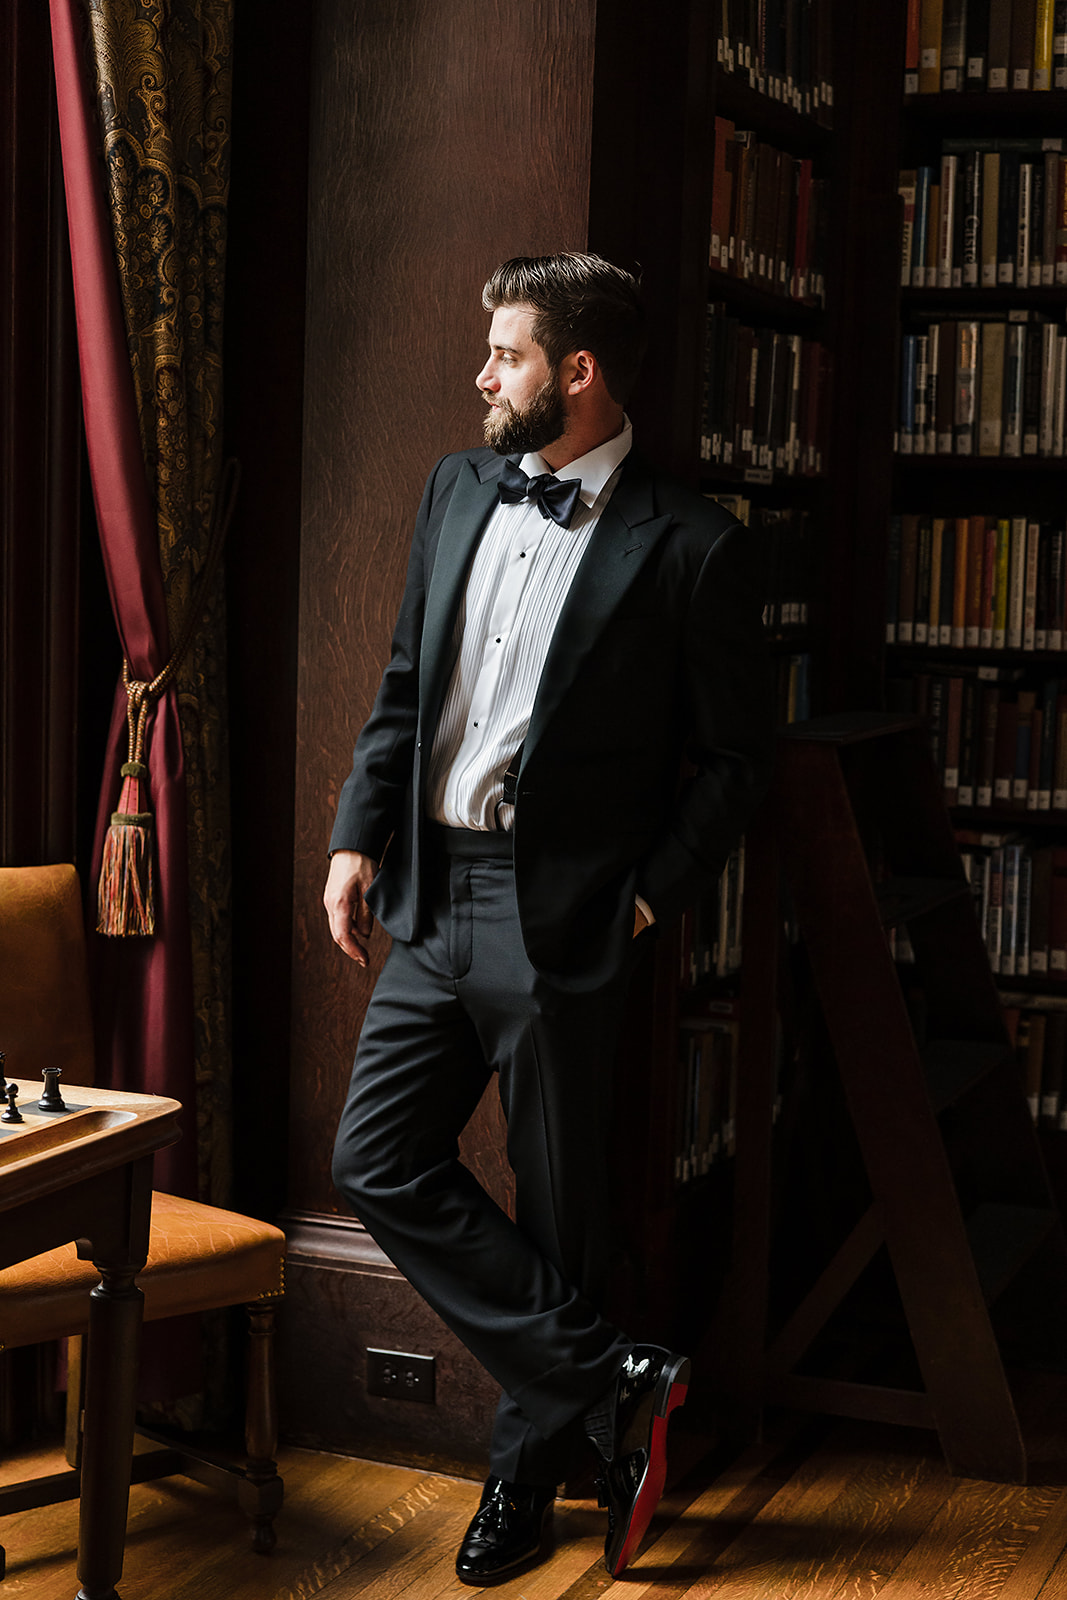 Timeless and elegant groom portrait at the Union League wedding in Philadelphia